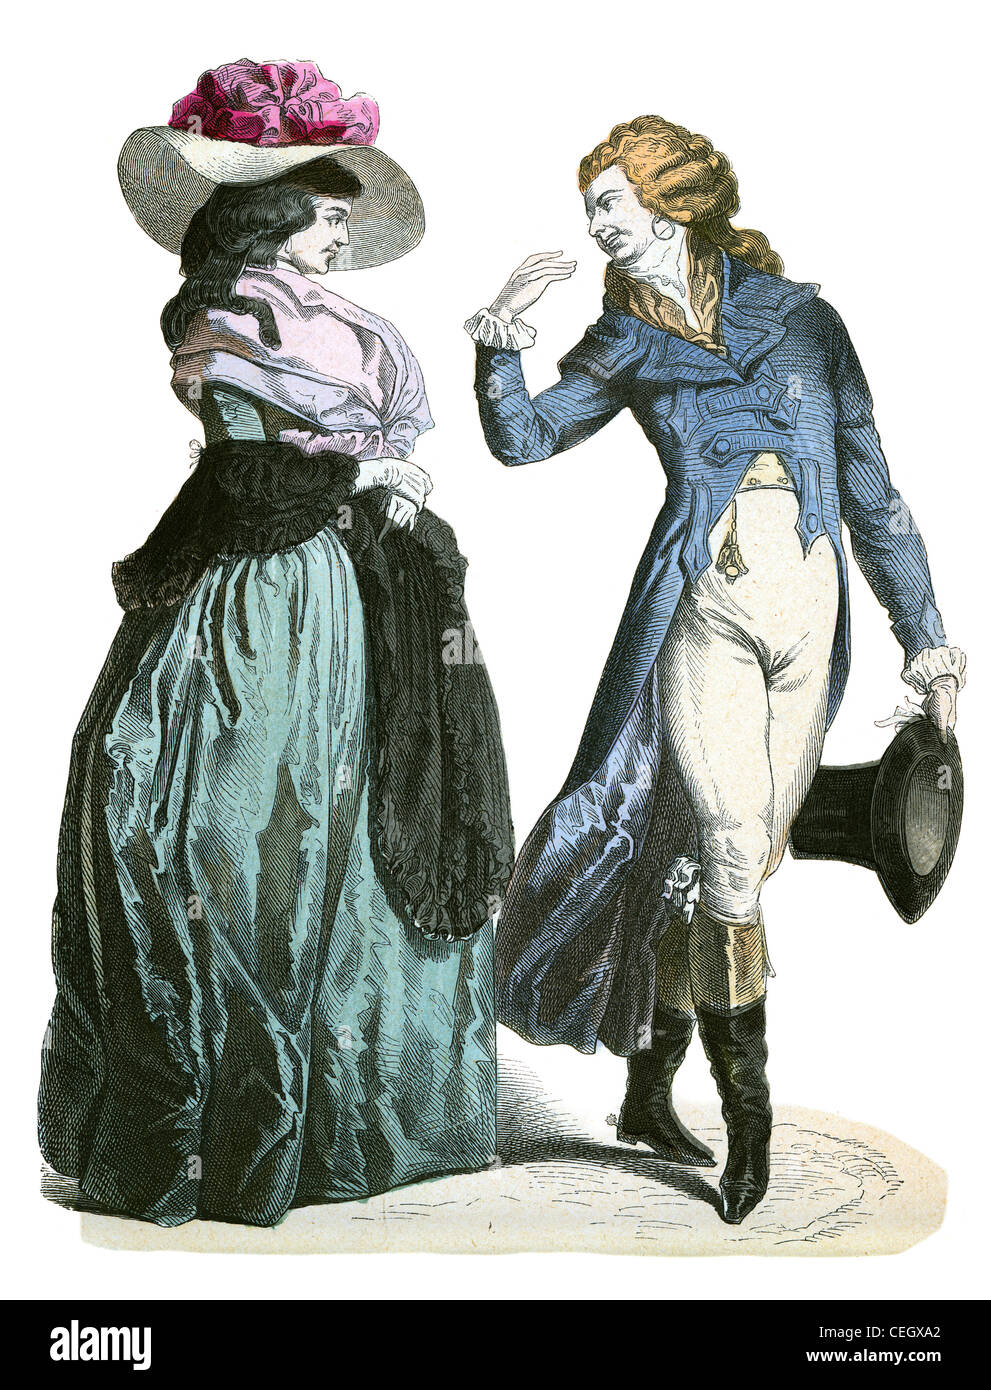 A couple in the fashion of the German Werther period in the 18th century Stock Photo